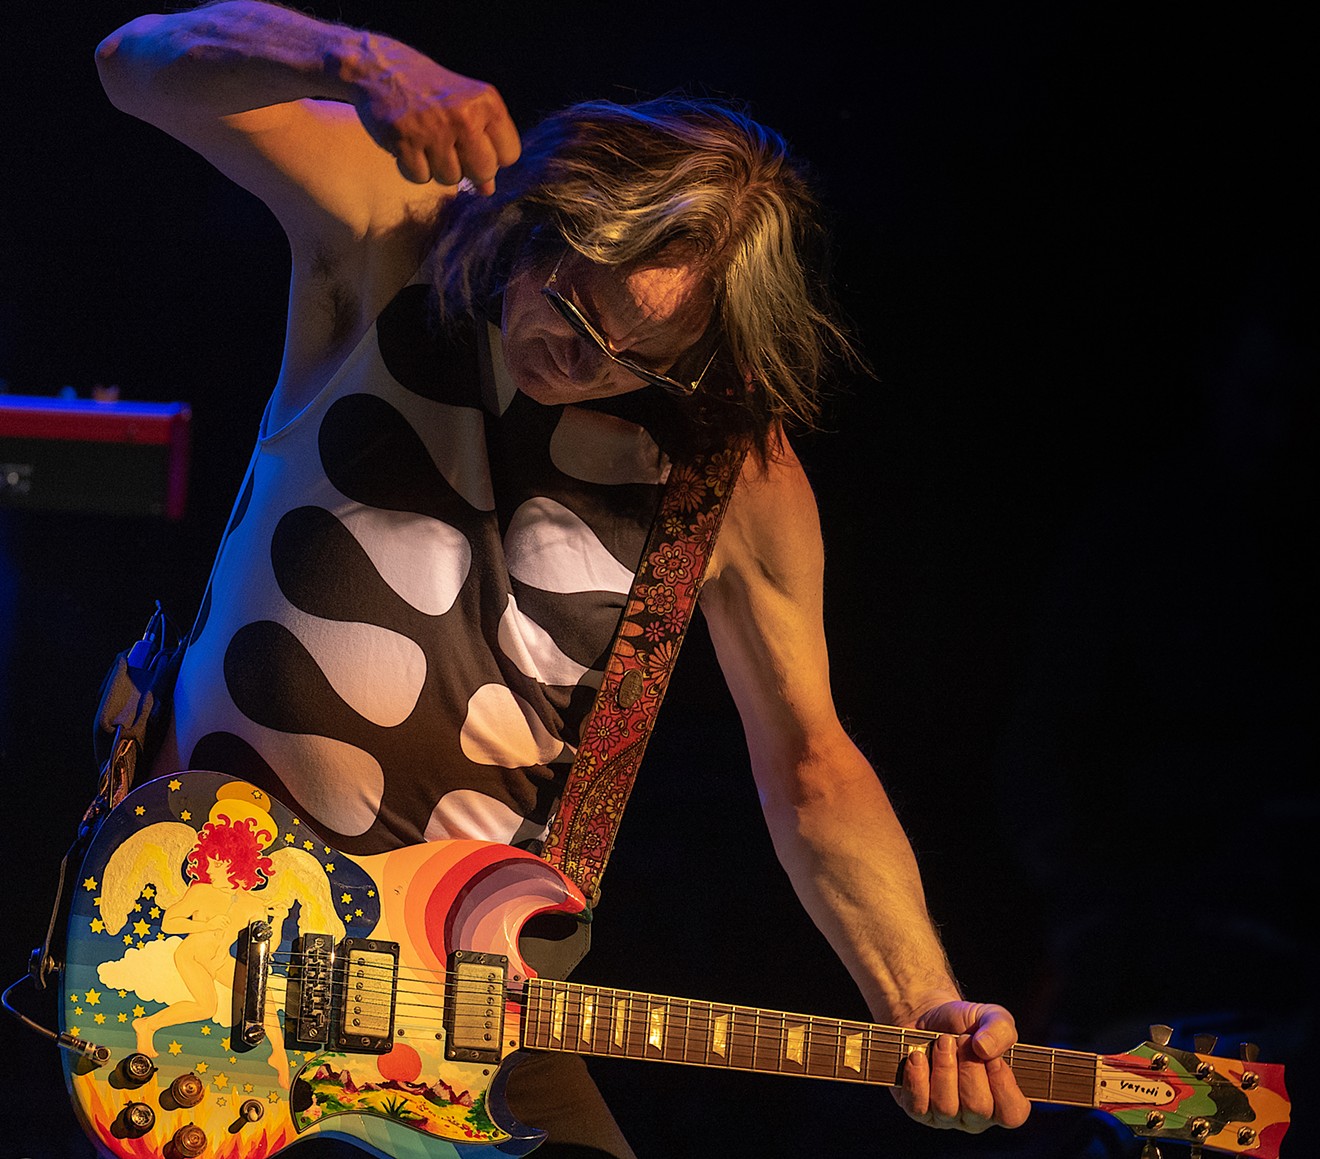 Todd Rundgren will play with a superstar lineup at the Broward Center September 25.